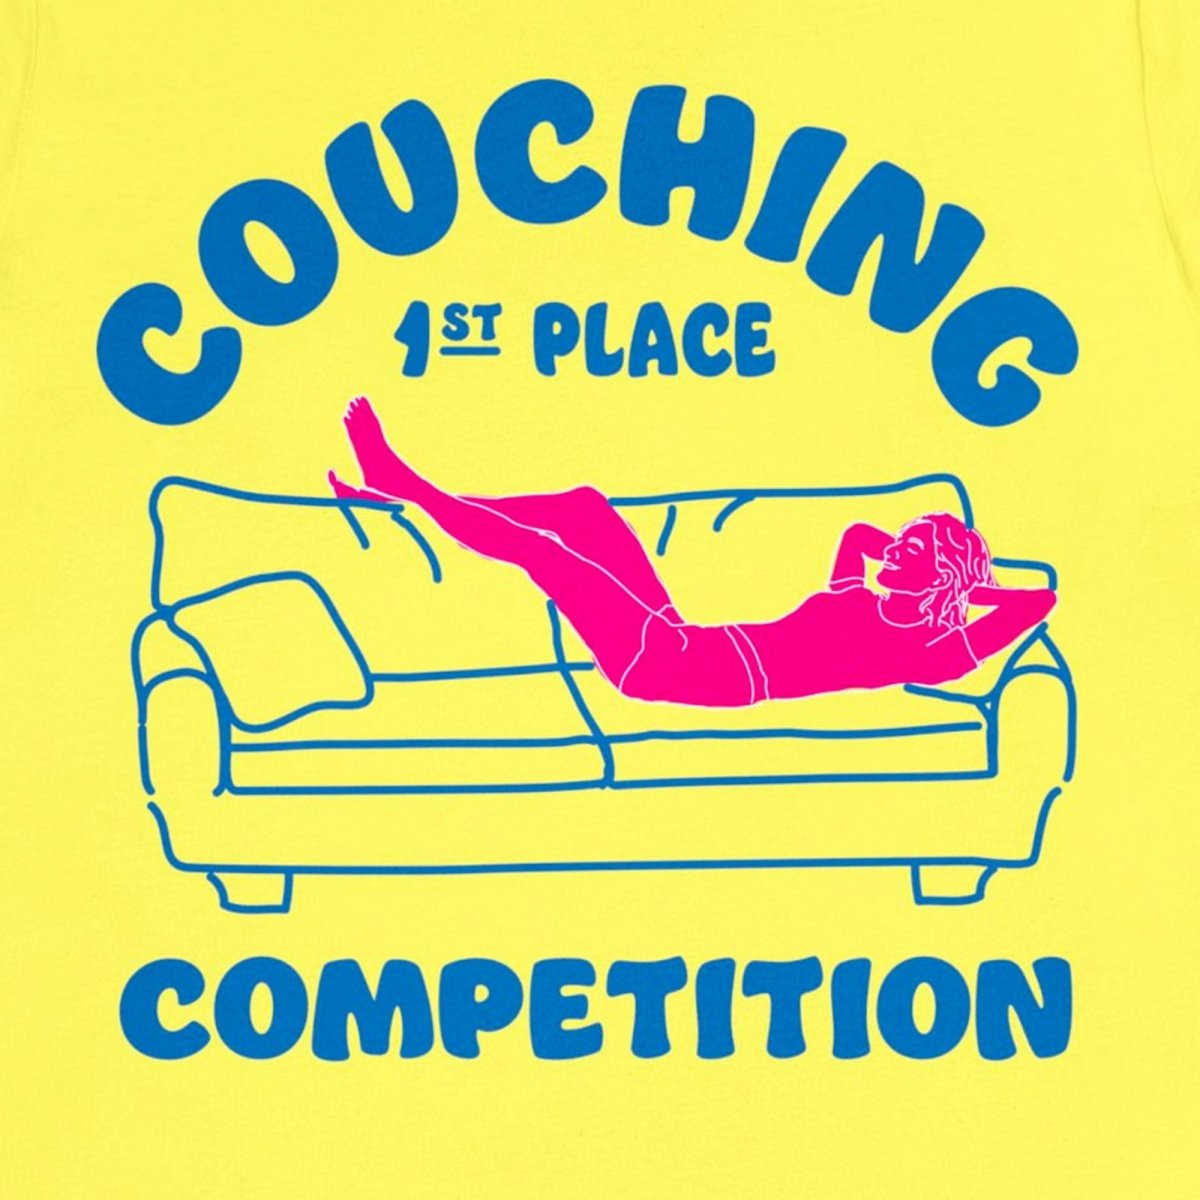 Couching Premium T-Shirt, Relax Inspiration, Recharge Yourself, Down Time, Gamer, Couch Potato, Weekend, Funny